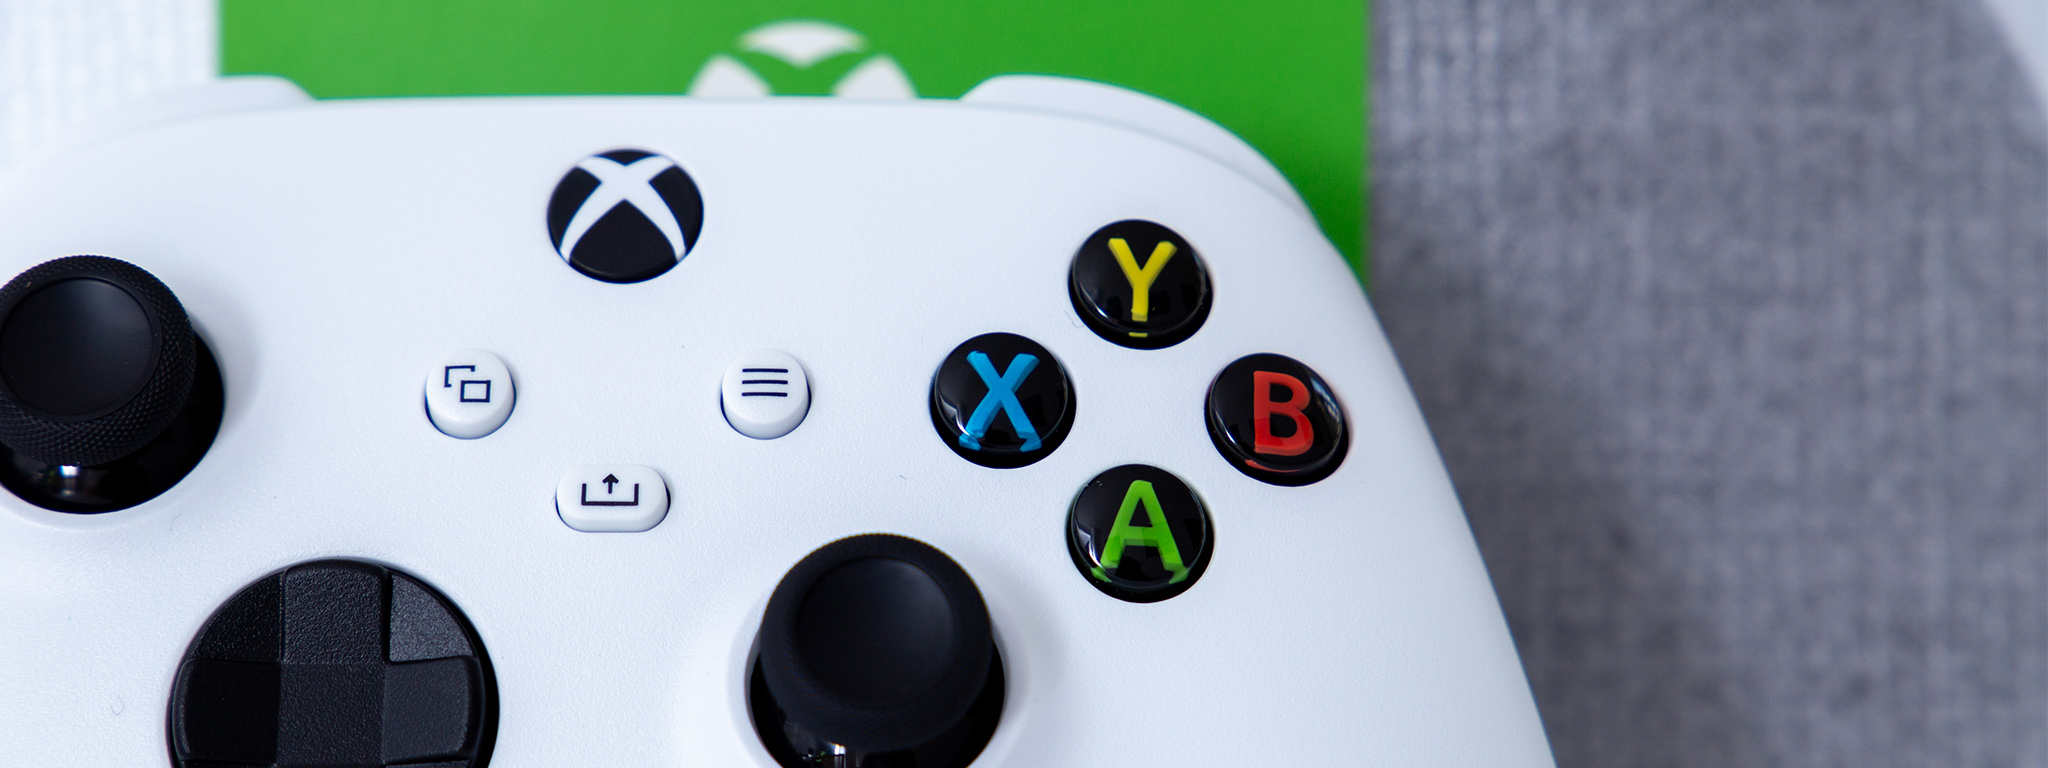 A closeup shot of a white Xbox Series S controller on a white and green background